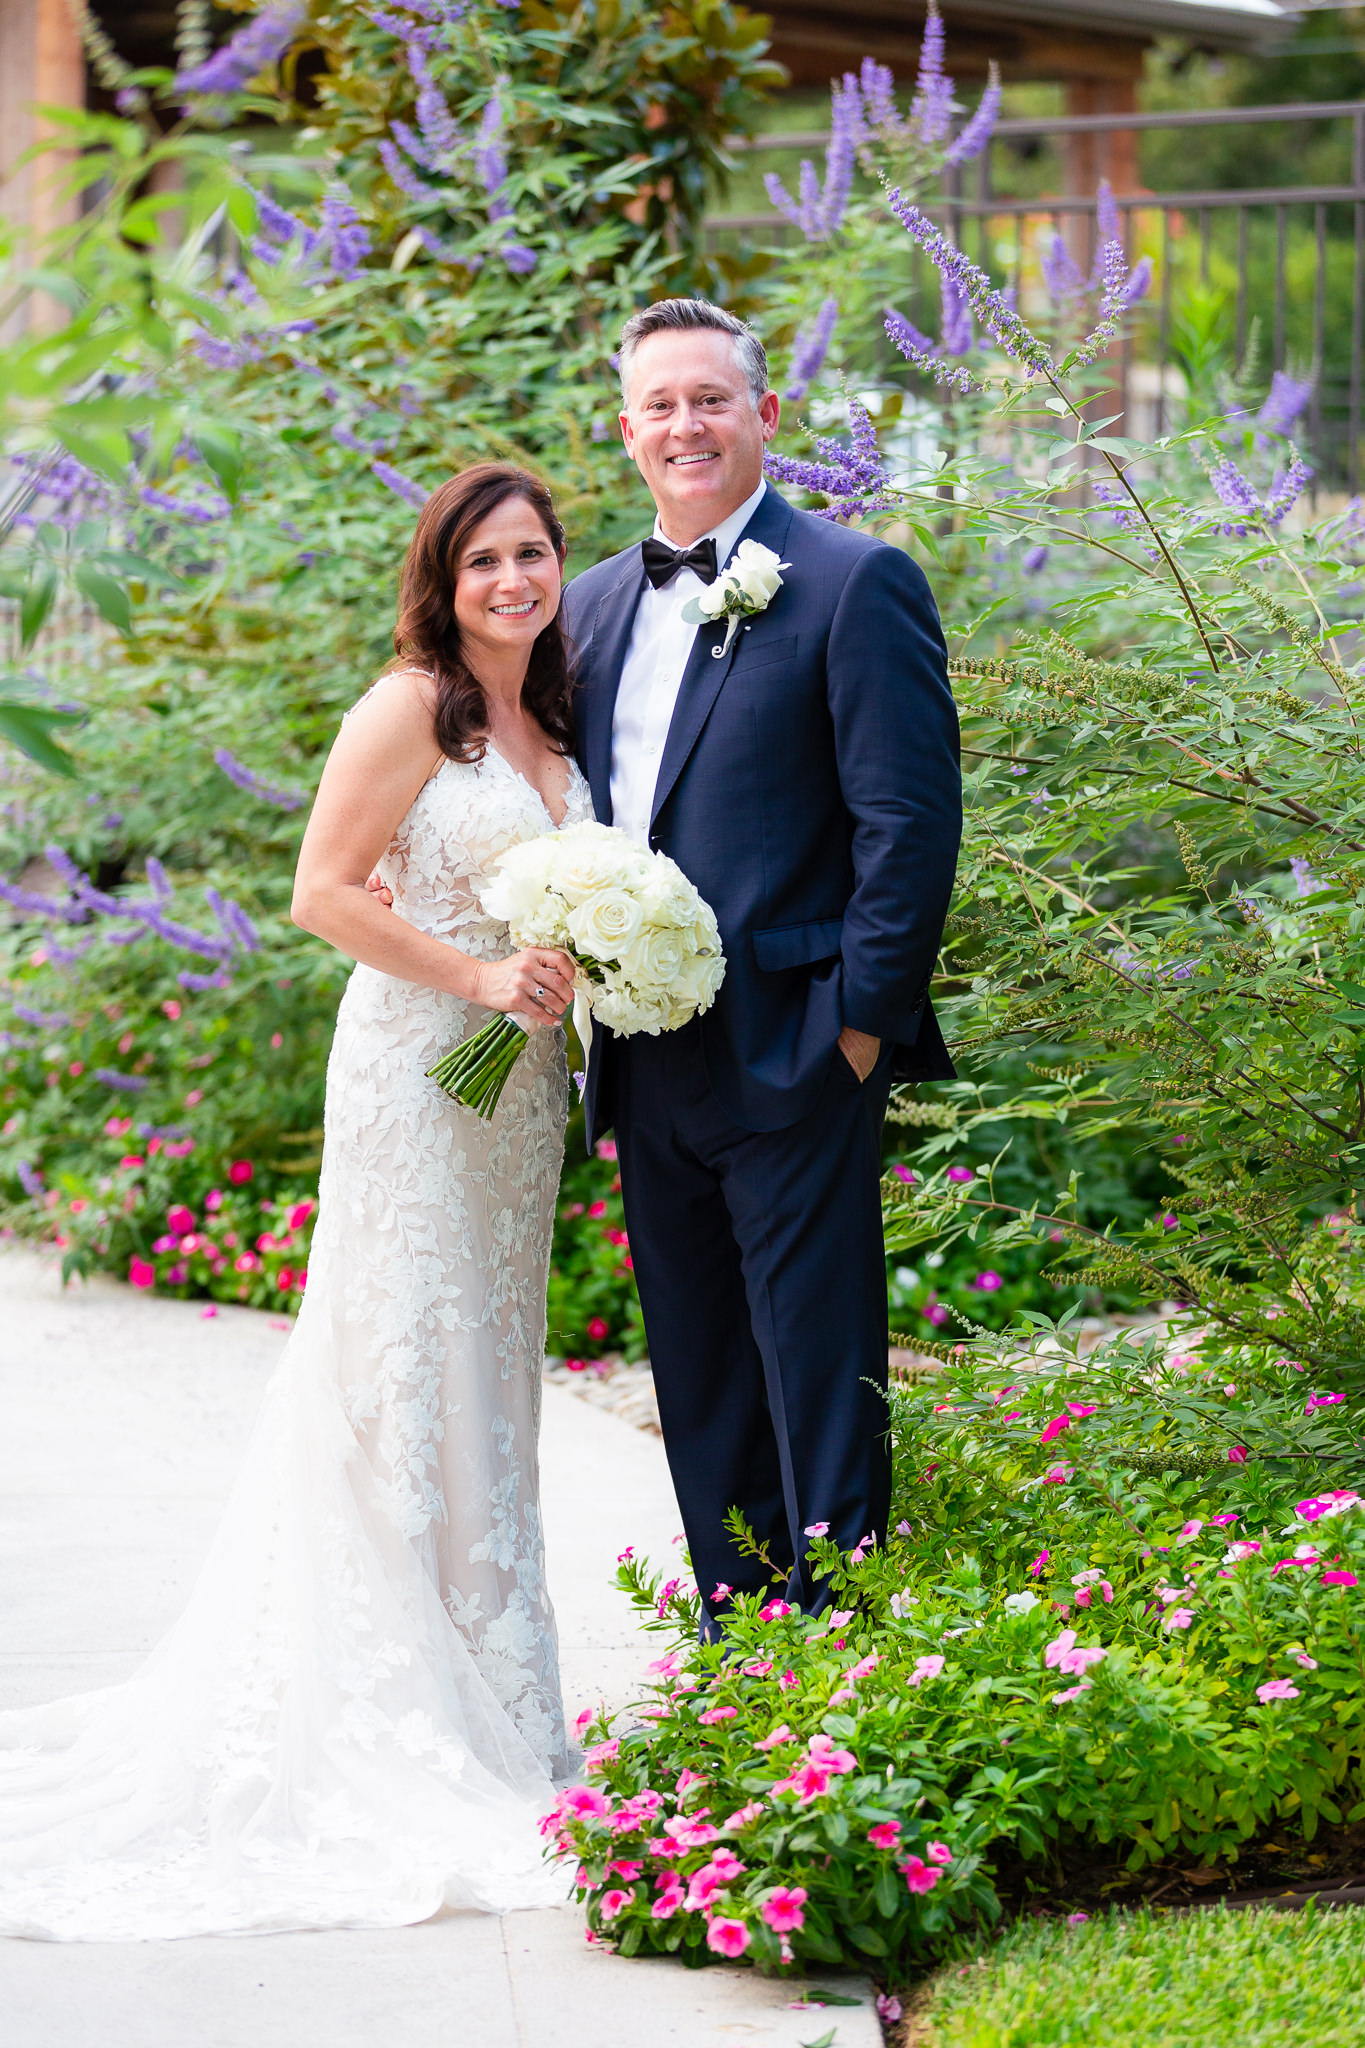 Granbury wedding with bride and groom in a garden together for their outdoor wedding with bride in a lace wedding dress holding a large rose bouquet